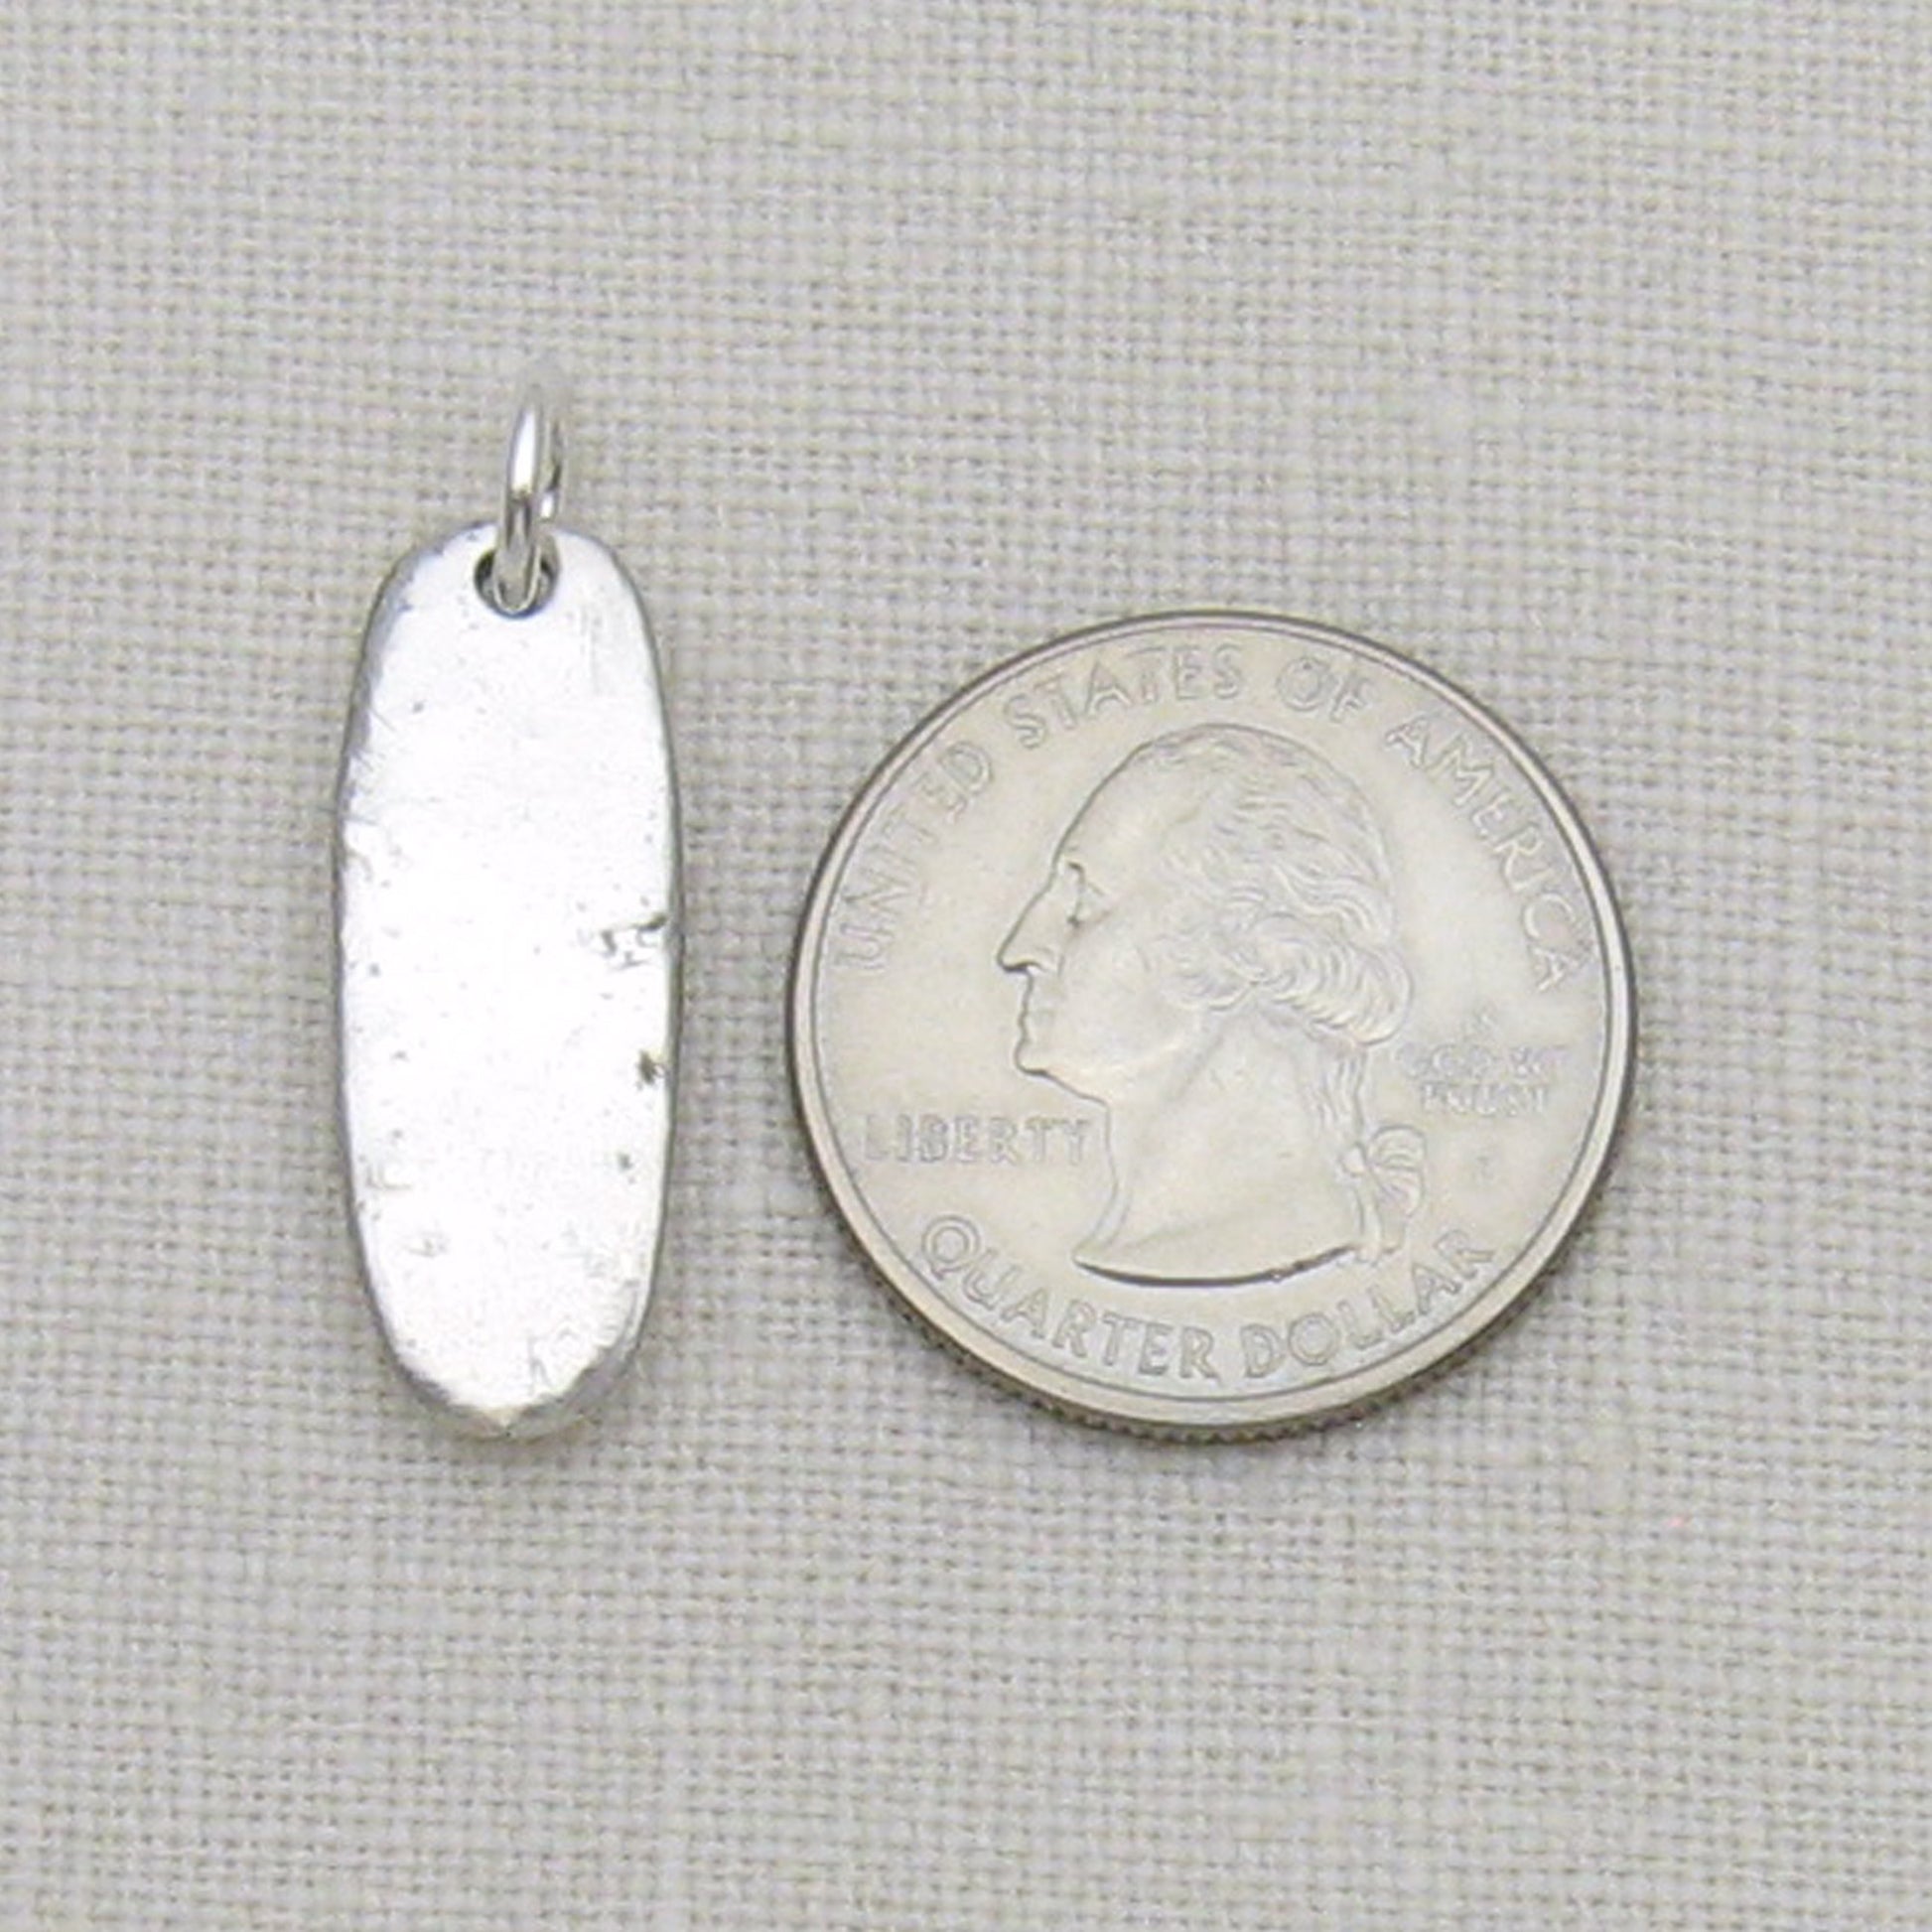 Silver Bar Cremation Ashes Pendant shown next to quarter for size reference